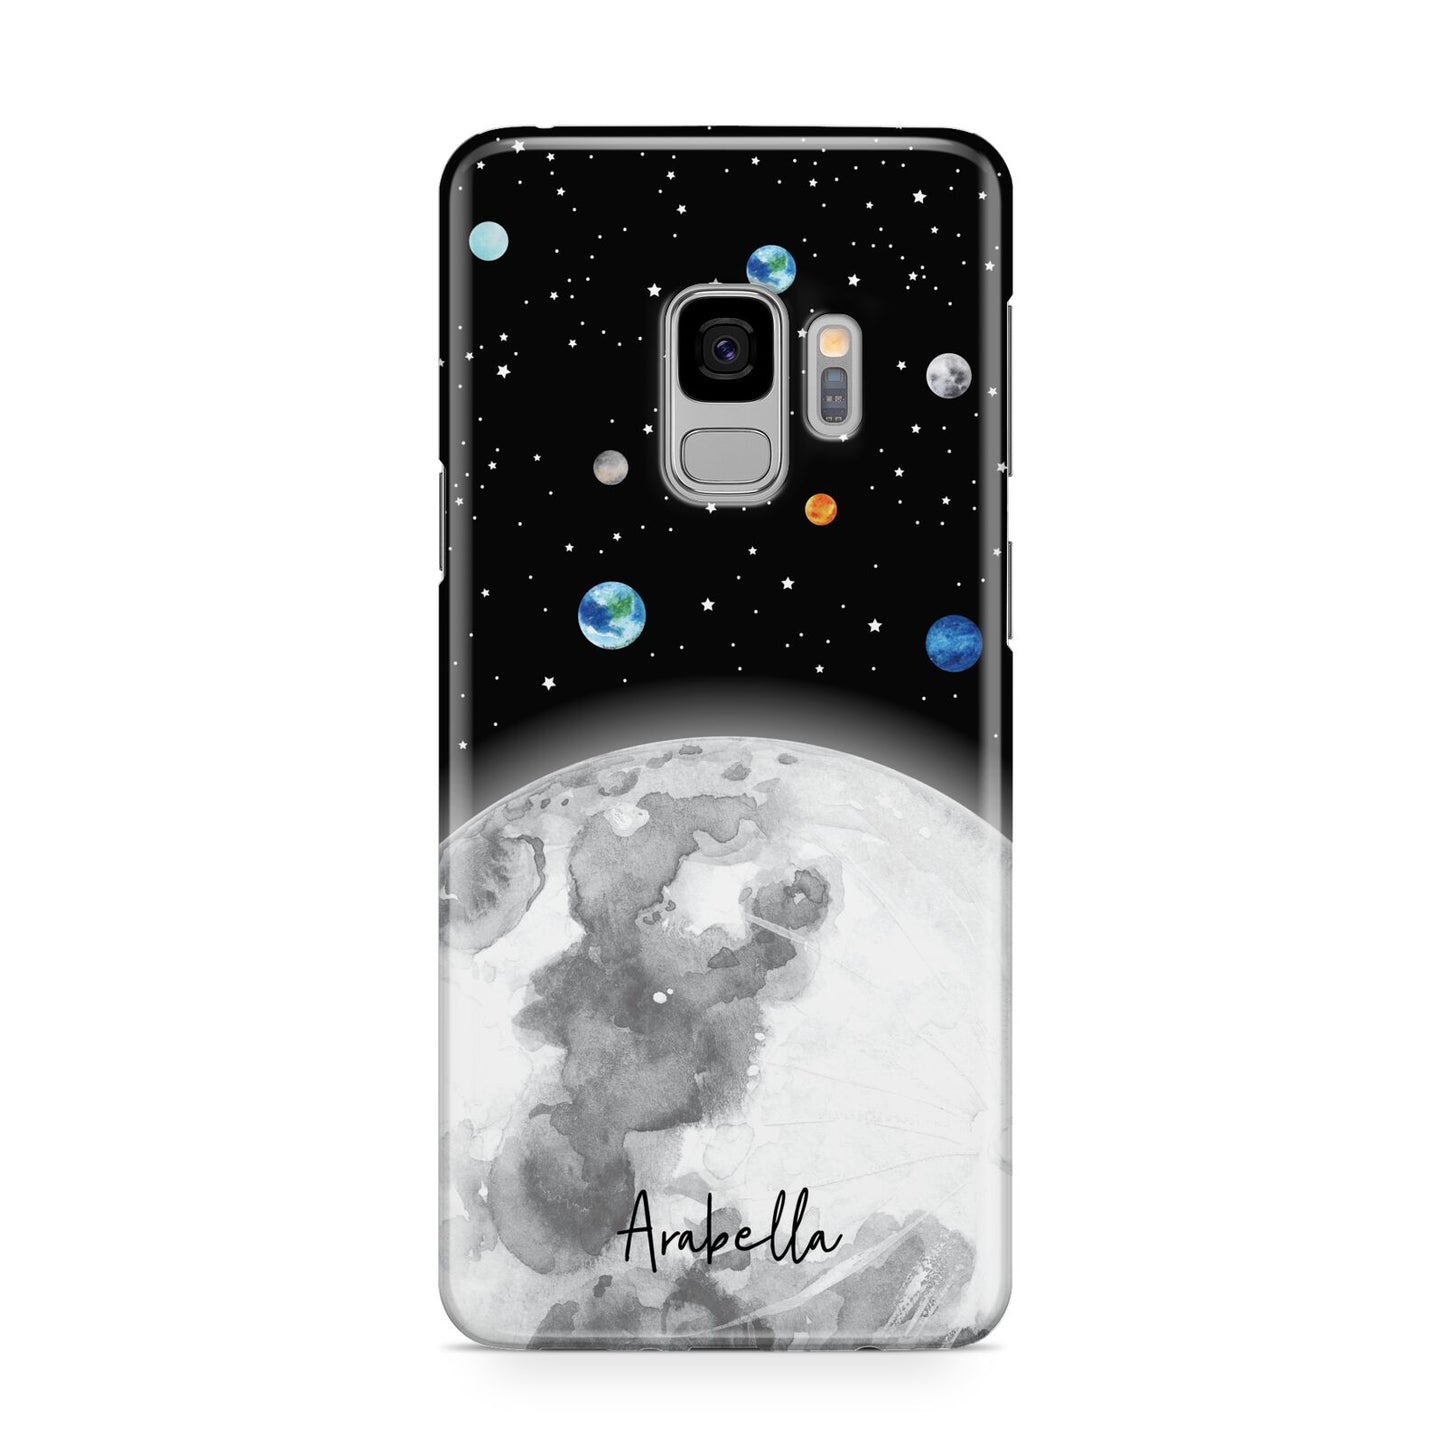 Watercolour Close up Moon with Name Samsung Galaxy S9 Case